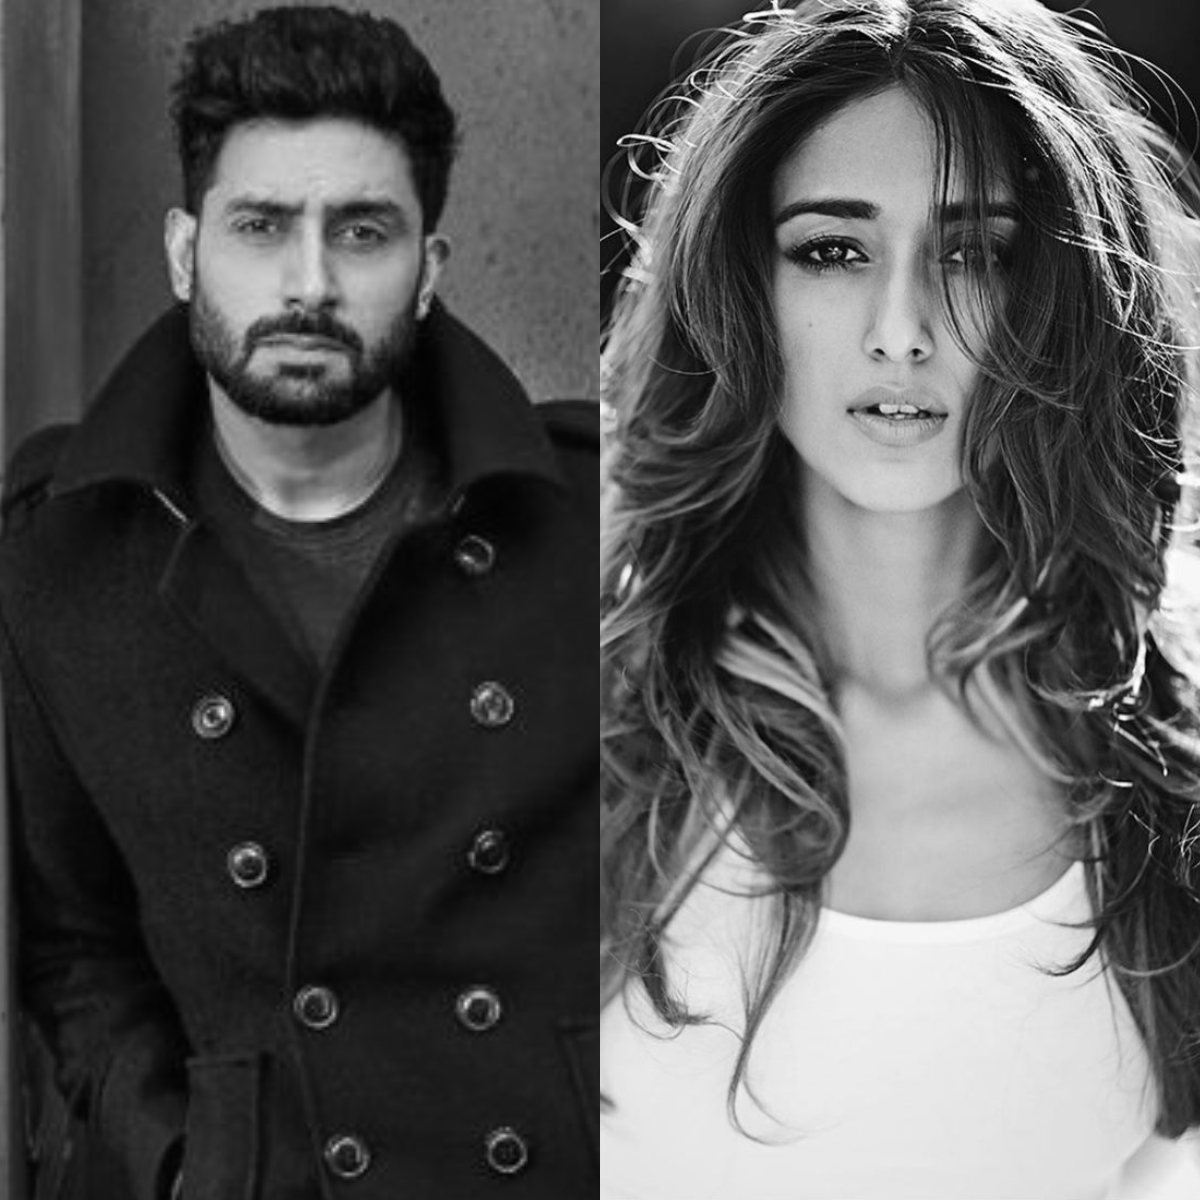 EXCLUSIVE: Are Abhishek Bachchan, Ileana D’Cruz the new entrants in Life in a Metro sequel?